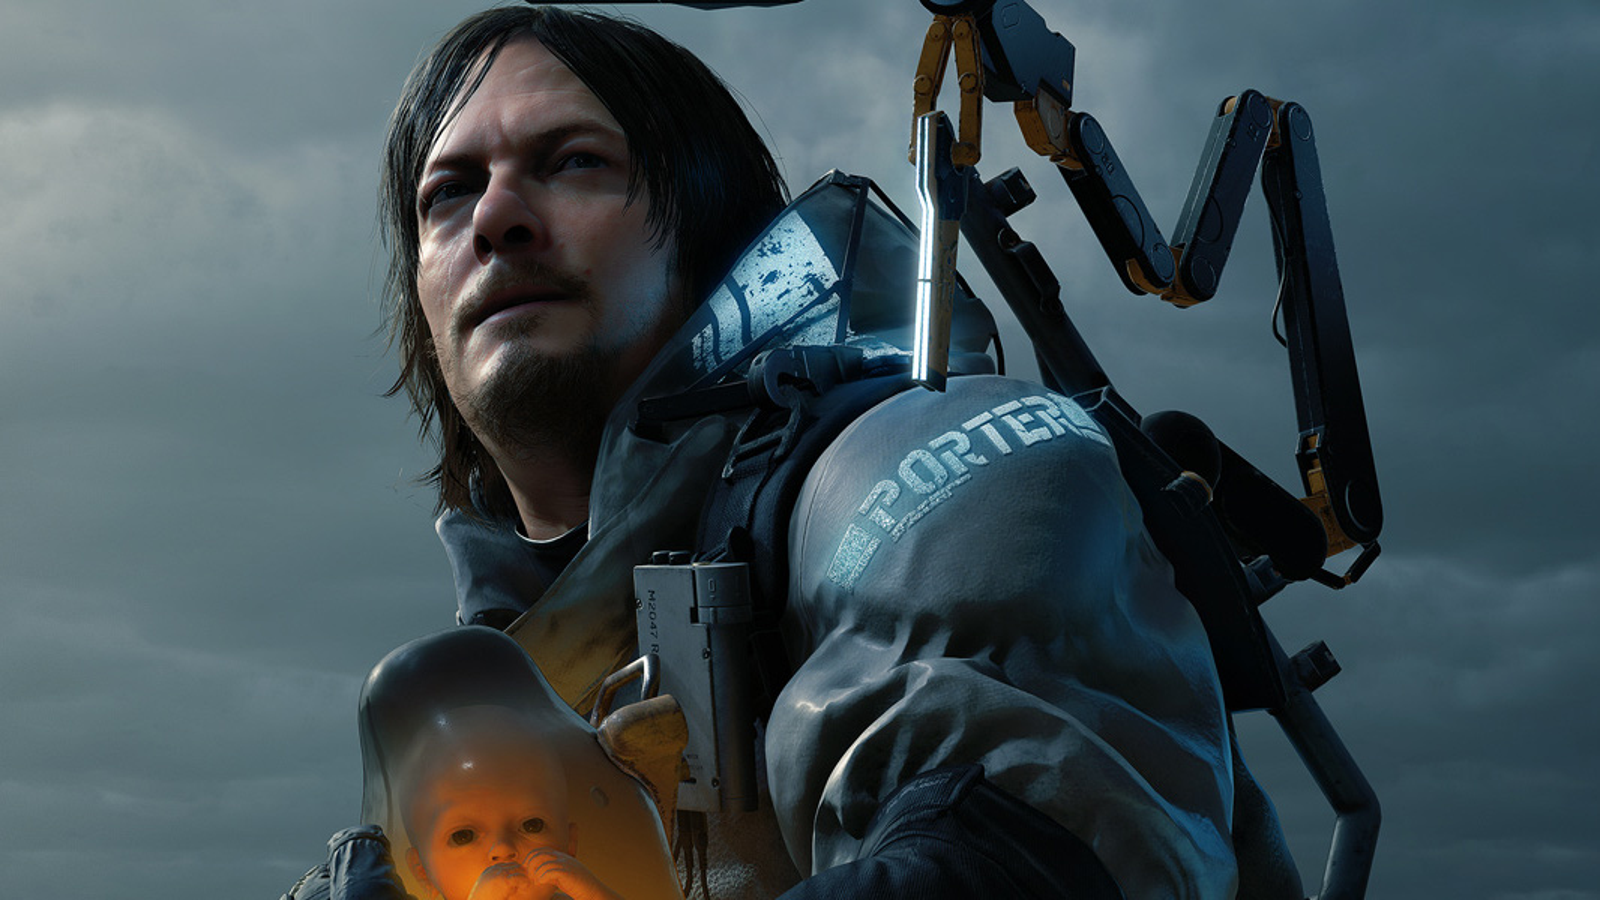 Xbox appears to be teasing Death Stranding for PC Game Pass